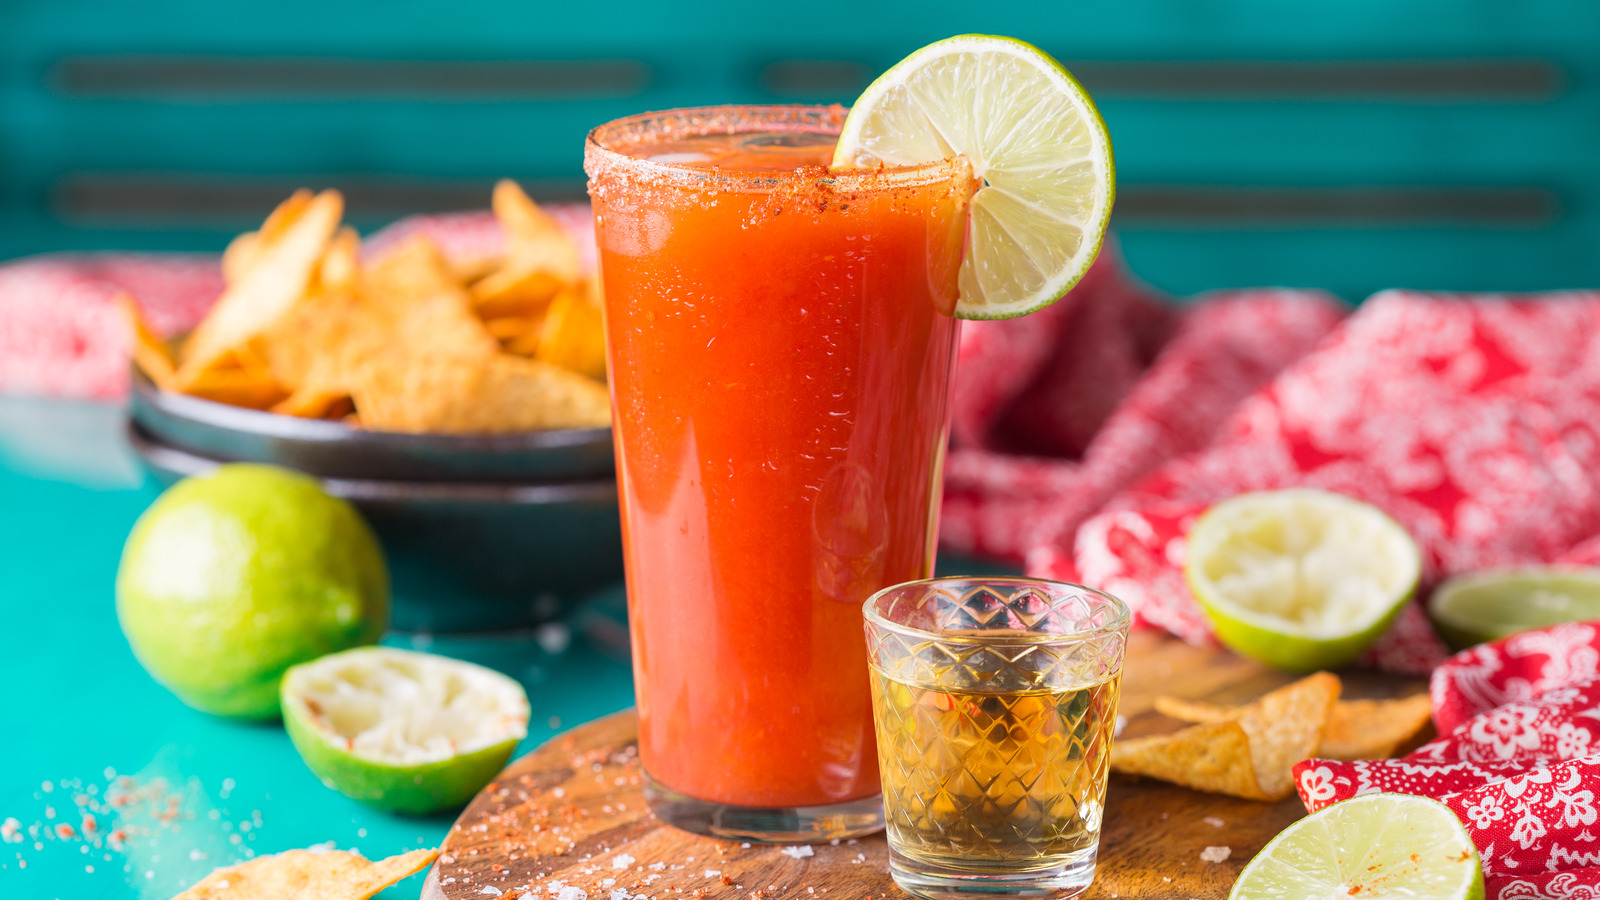 https://www.tastingtable.com/img/gallery/chavela-the-mexican-beer-cocktail-bloody-mary-fans-will-love/l-intro-1666804201.jpg